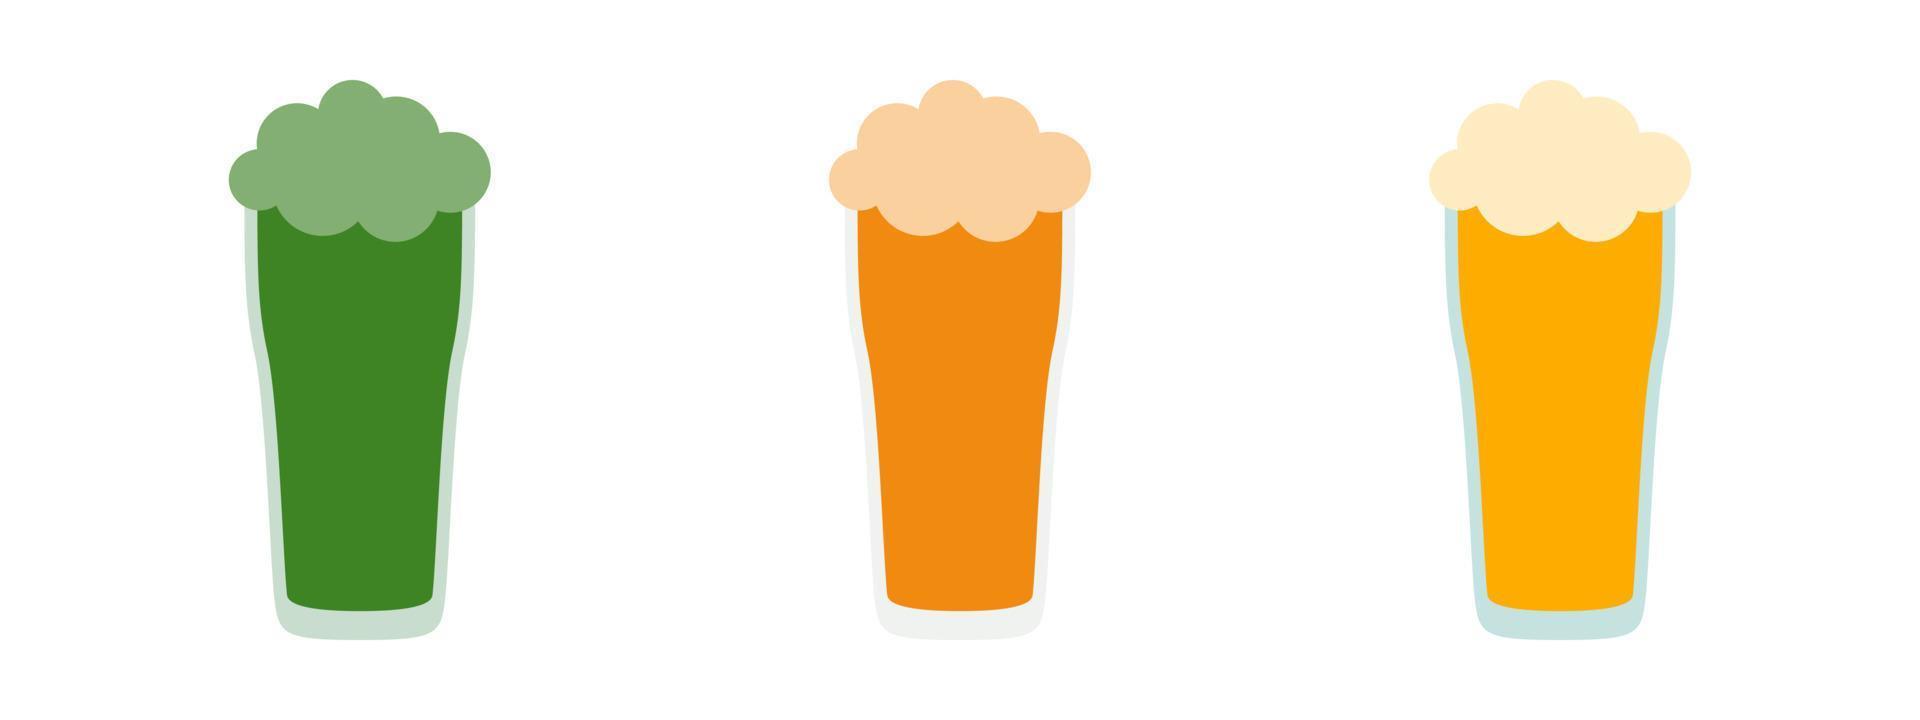 Beer in flat style isolated vector